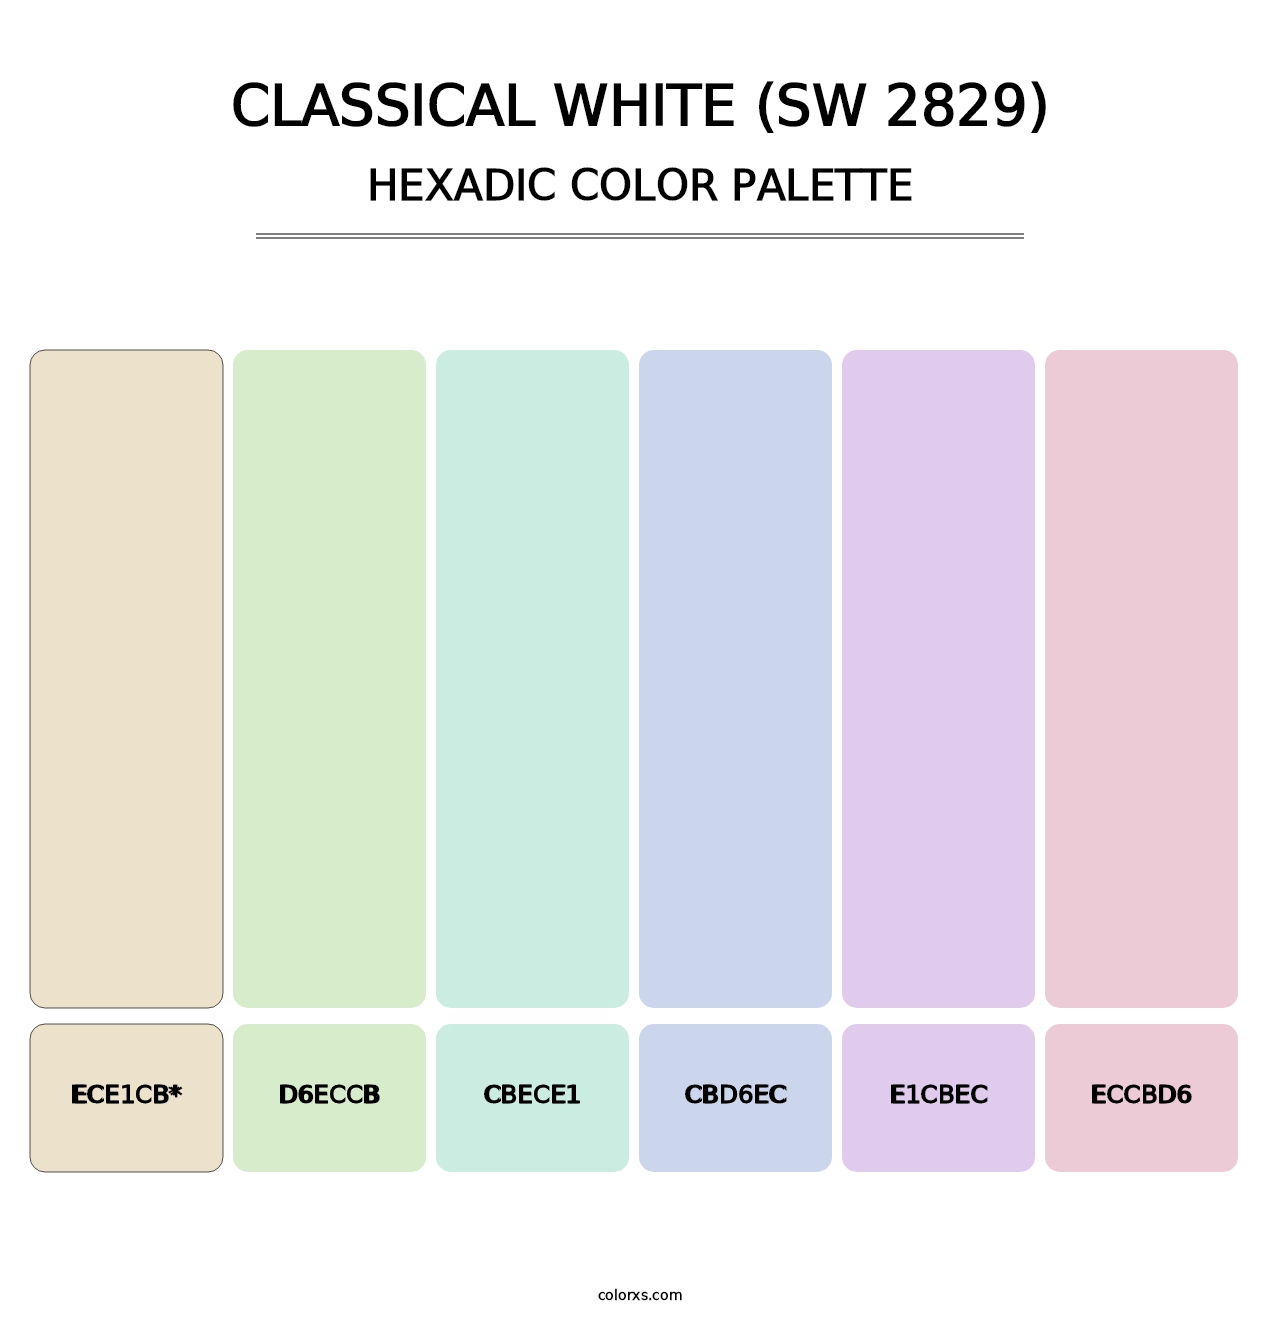 Classical White (SW 2829) - Hexadic Color Palette